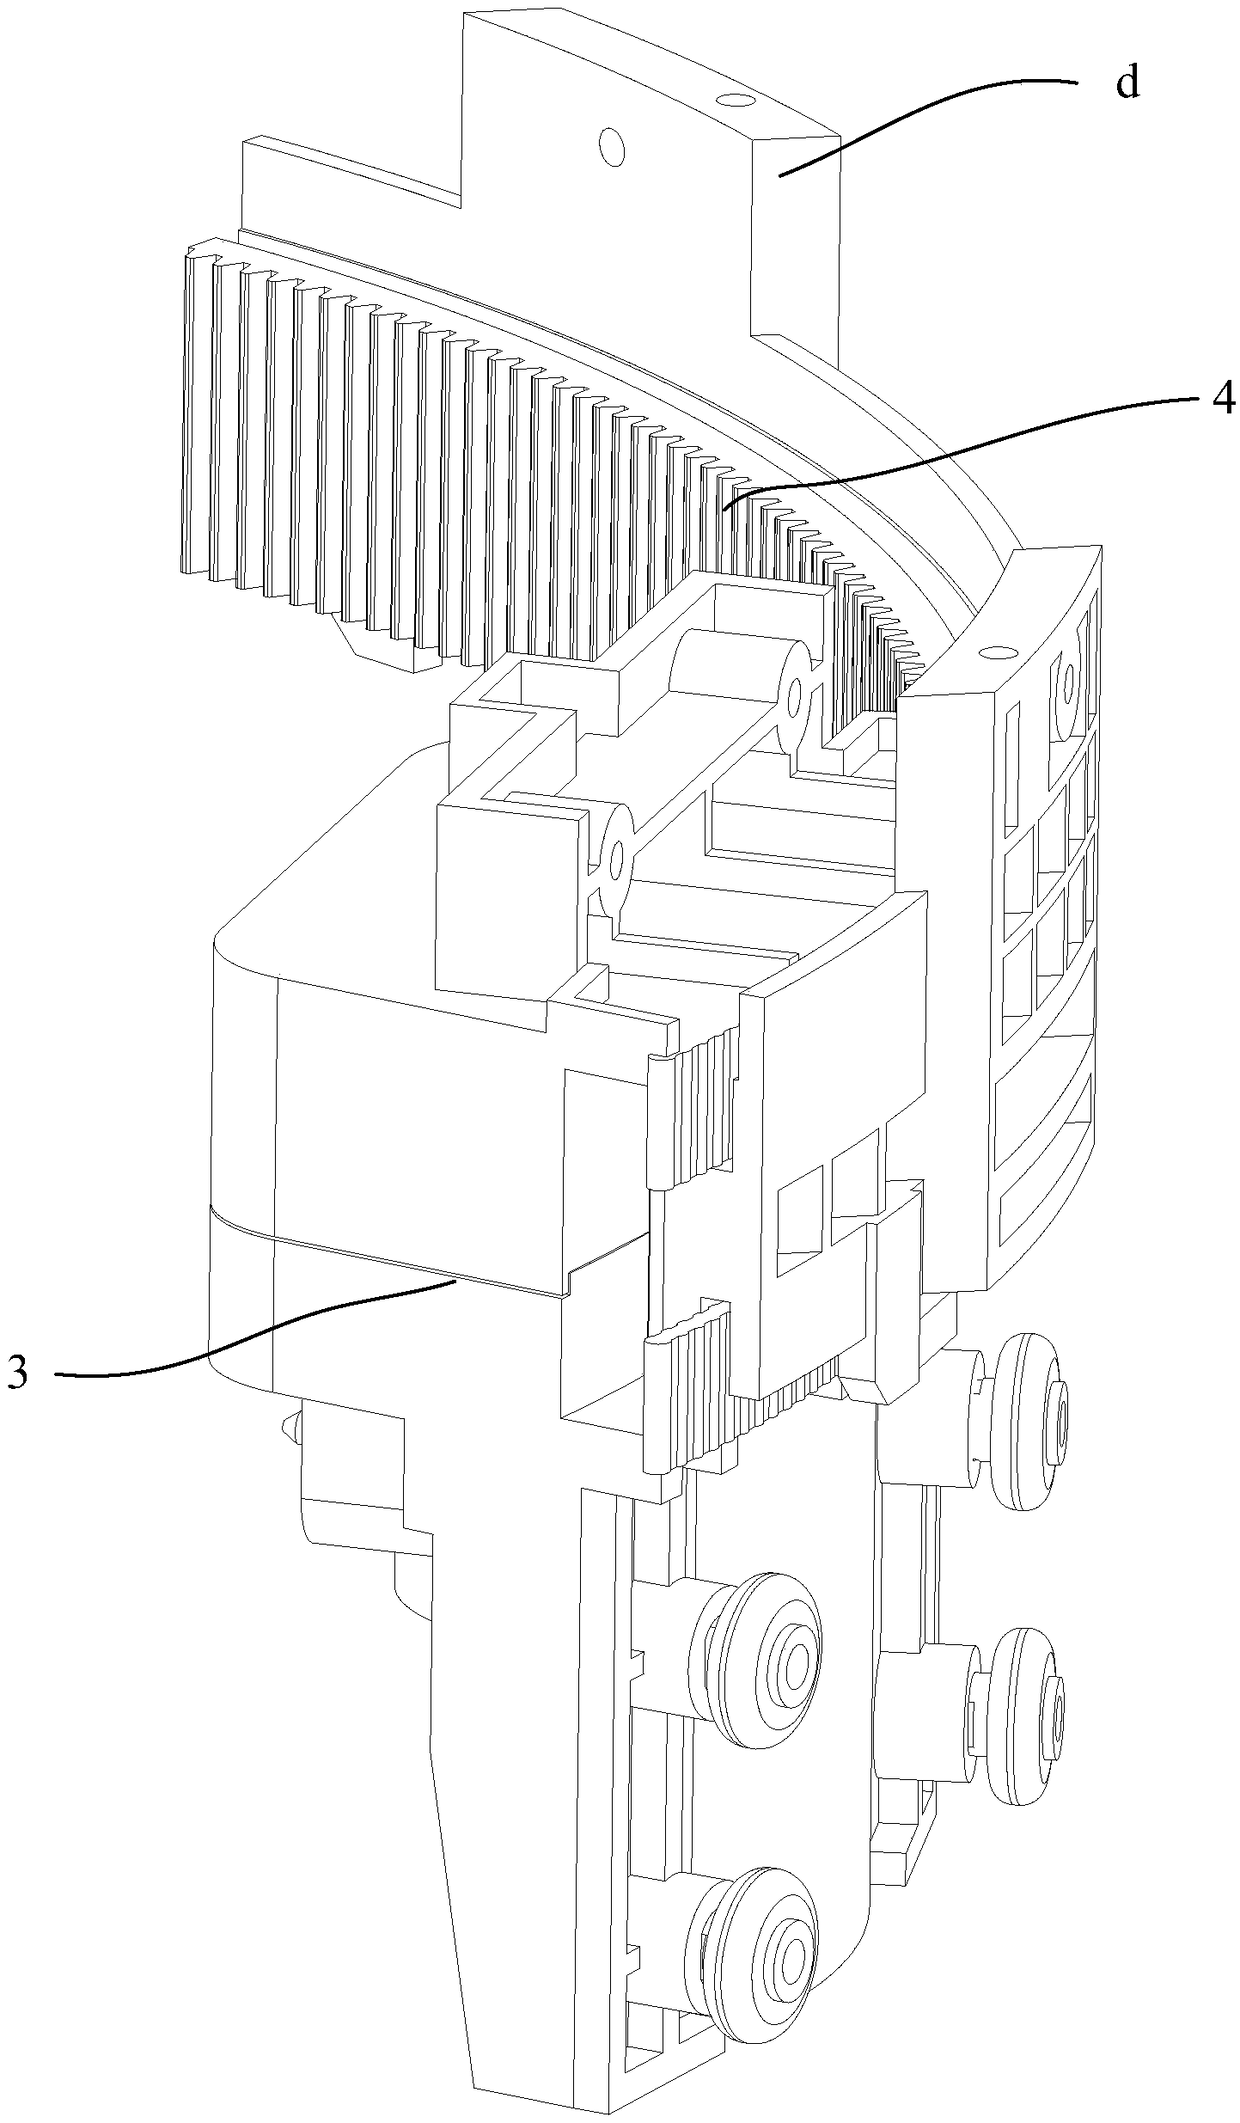 Moving door mechanism and air conditioning device